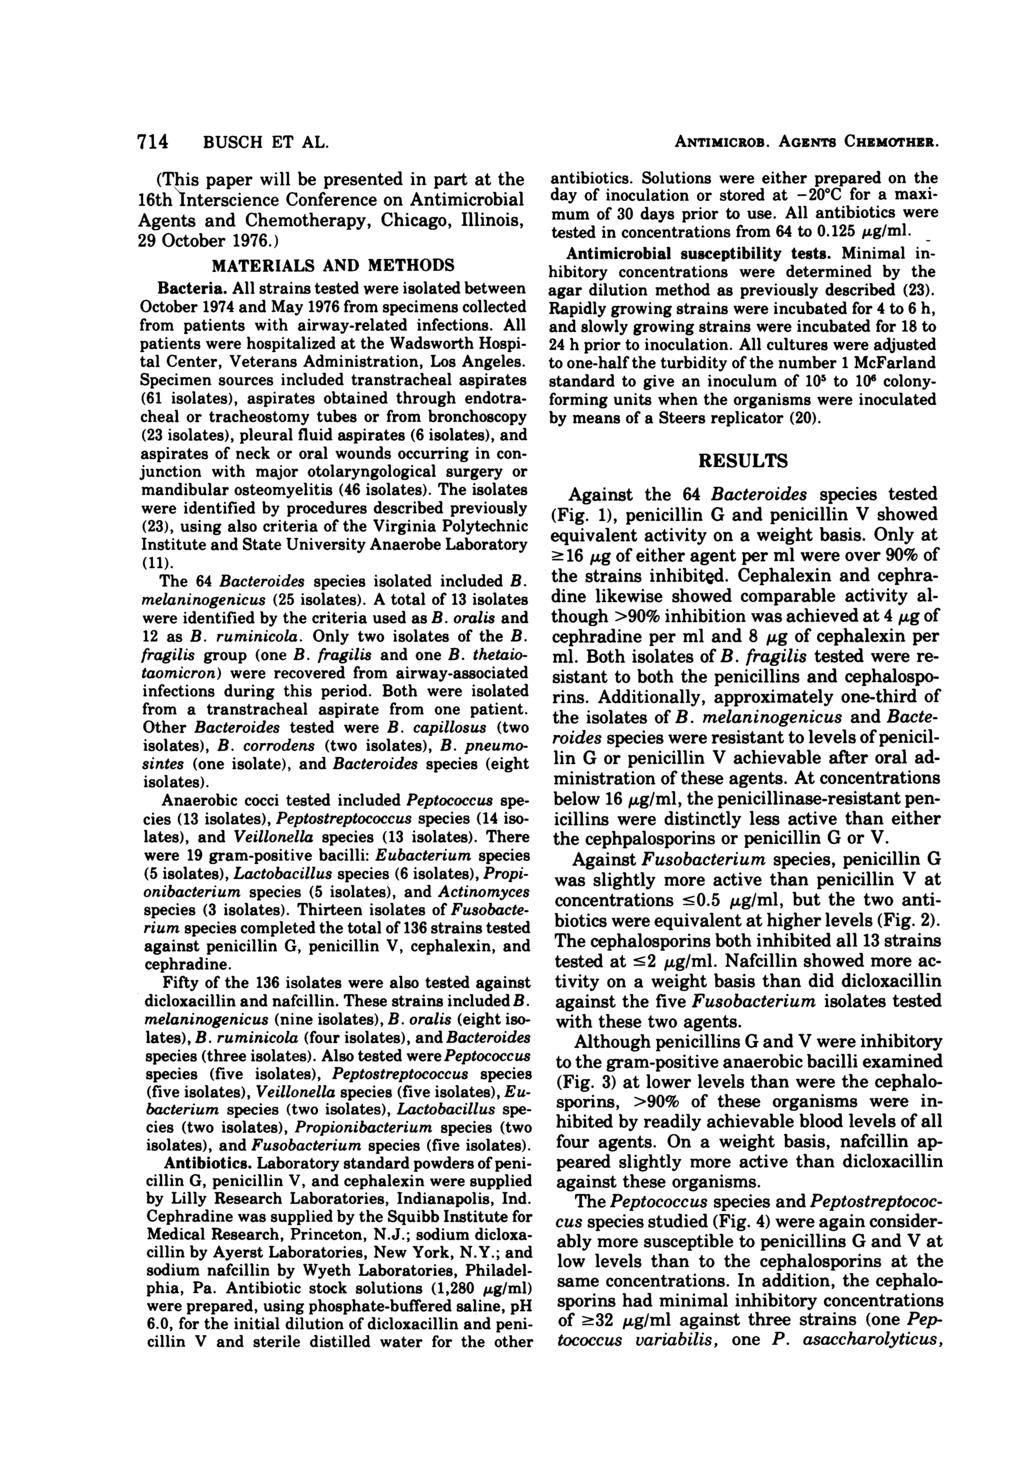 714 BUSCH ET AL. (This paper will be presented in part at the 16th Interscience Conference on Antimicrobial Agents and Chemotherapy, Chicago, Illinois, 29 October 1976.